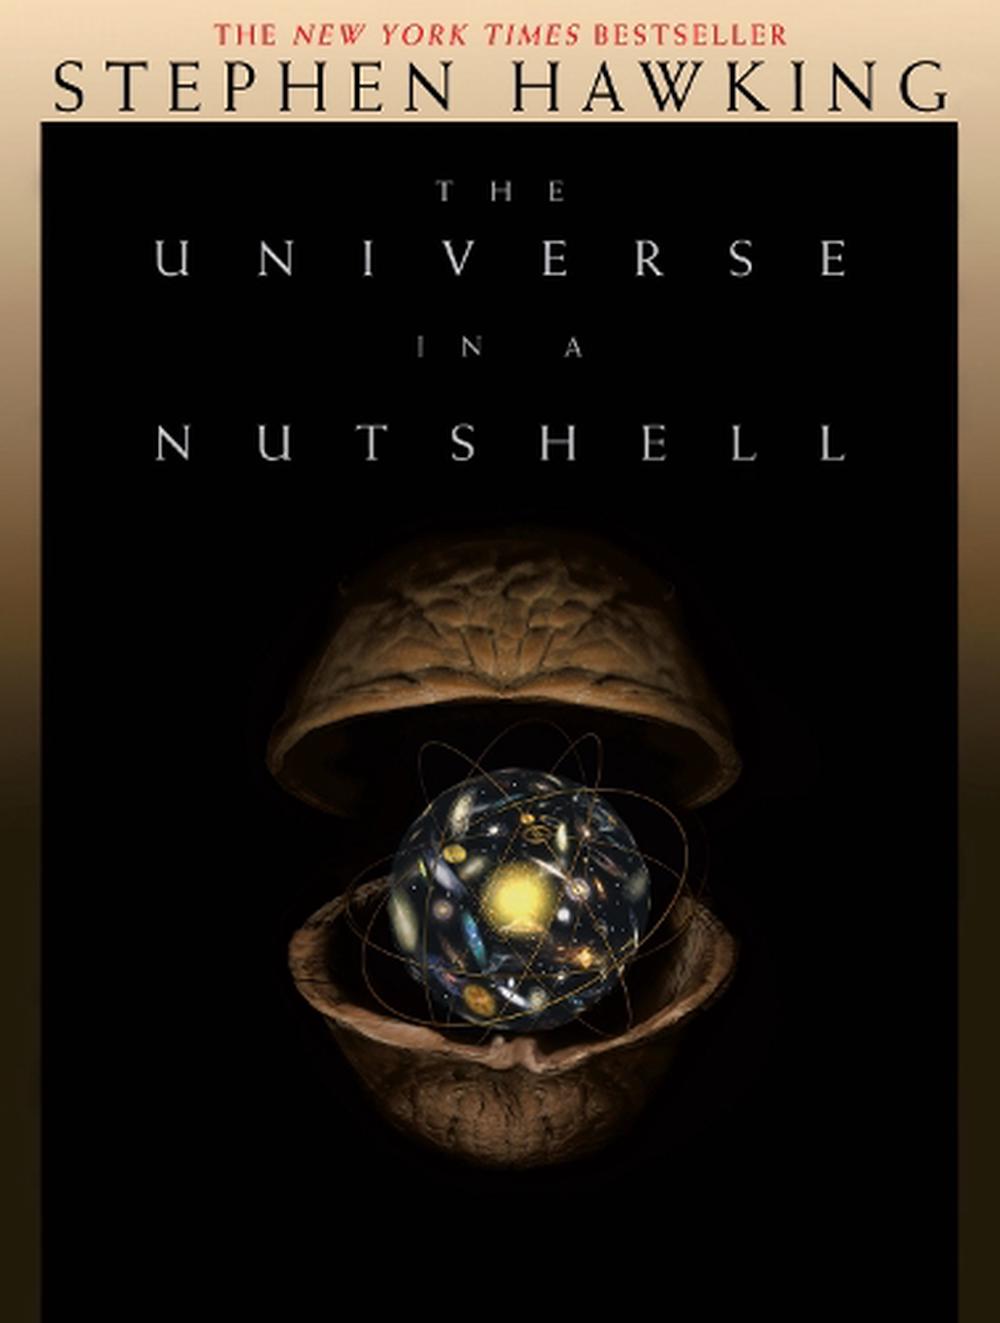 The Universe in a Nutshell by Stephen Hawking (English) Hardcover Book Free Ship 9780553802023 ...